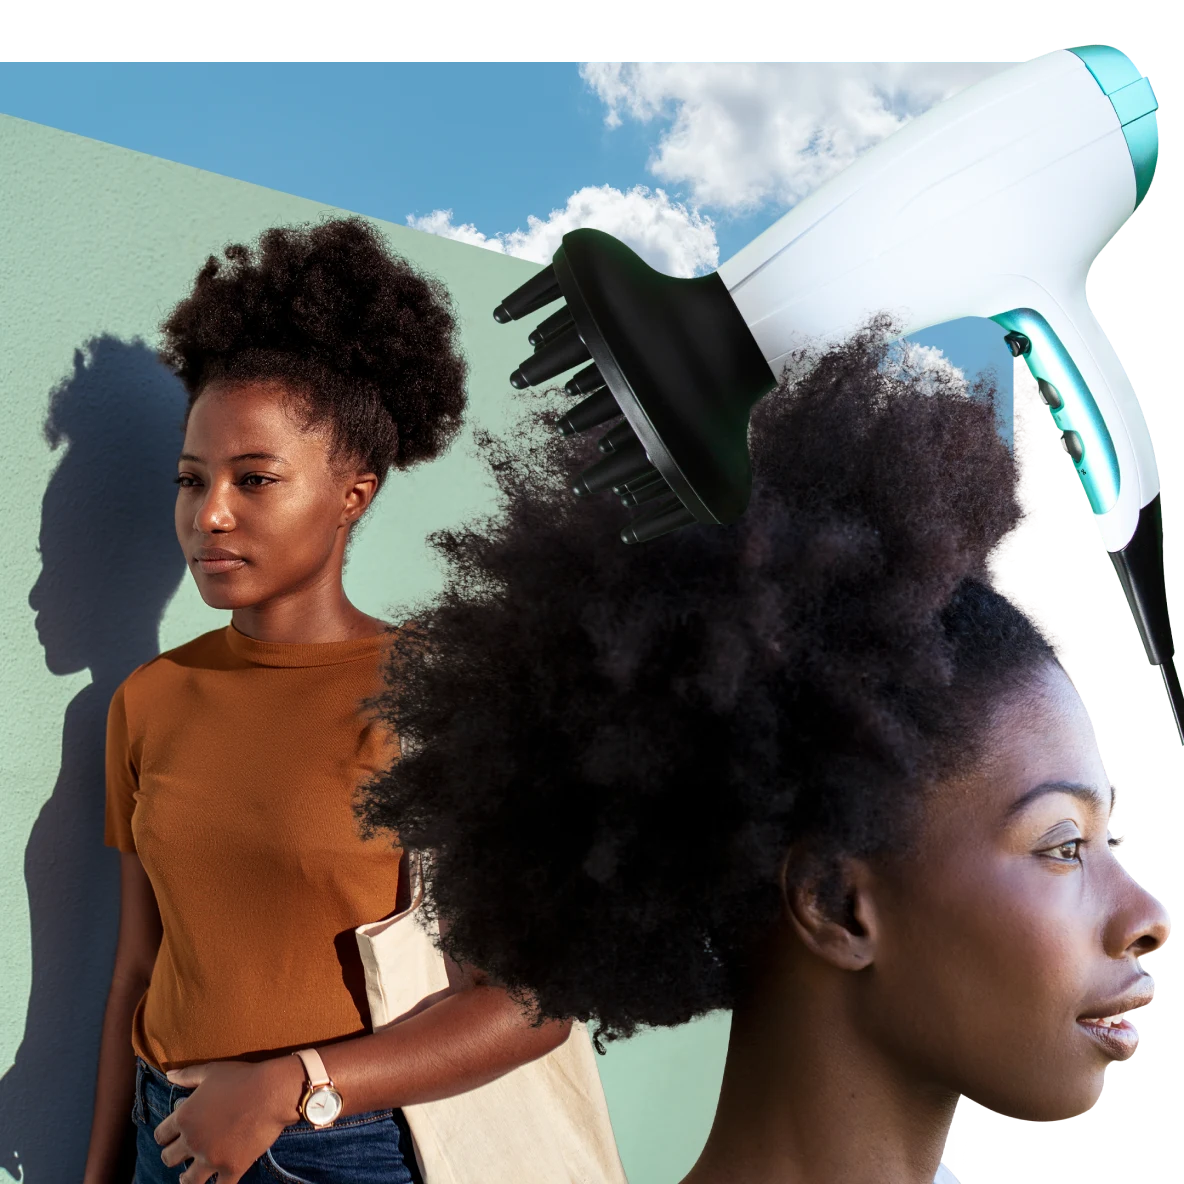 Two Black women with natural hair against a light green backdrop. One at left in a beige top, one at right stands under a white hair dryer. Blue sky and clouds in the background.